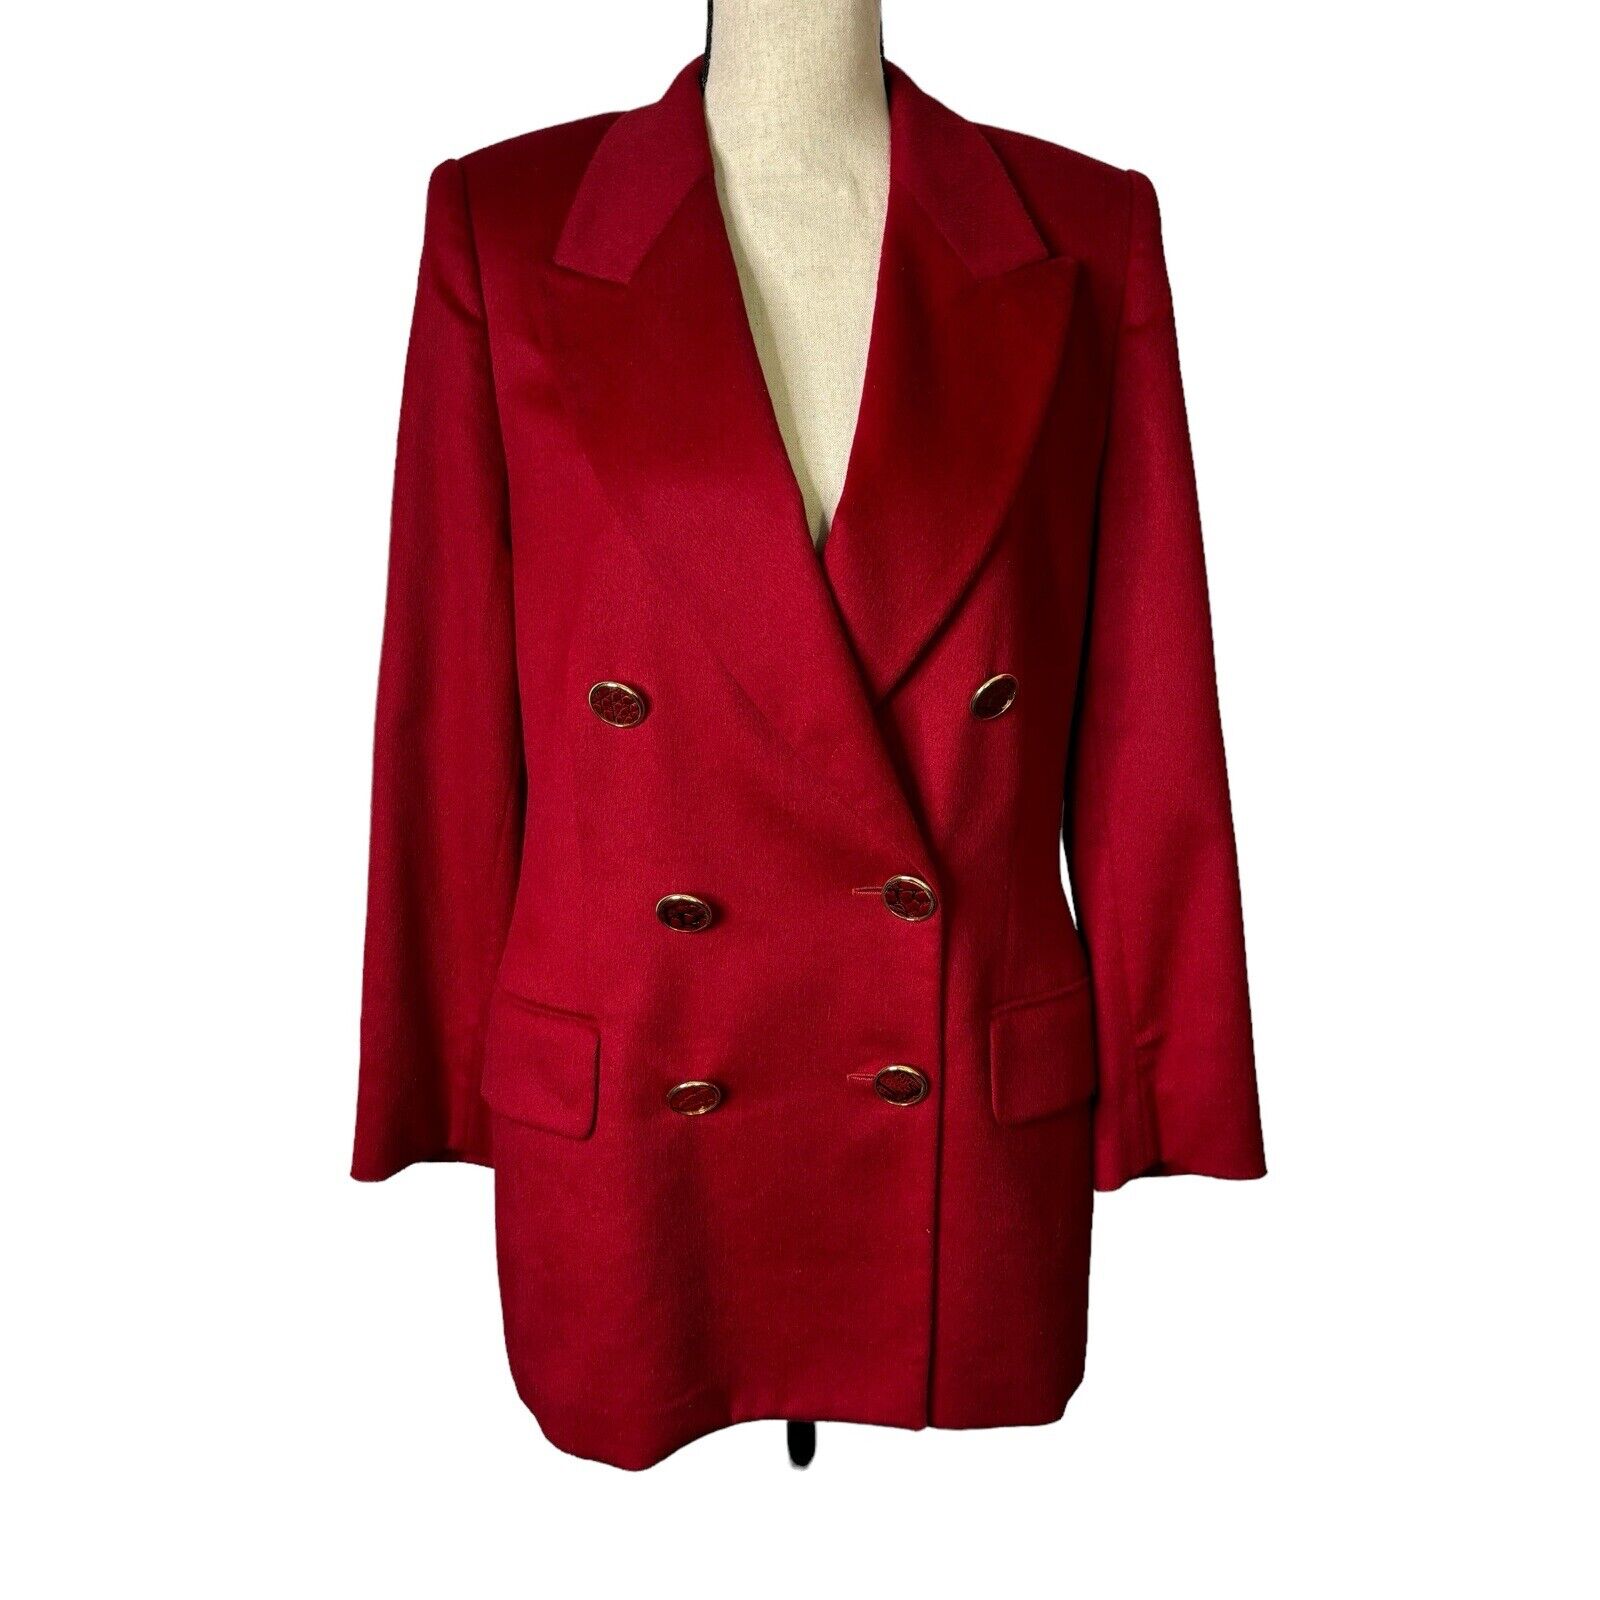 Escada Margaretha Ley Jacket Womens 40 Red Wool Double Breasted Vintage